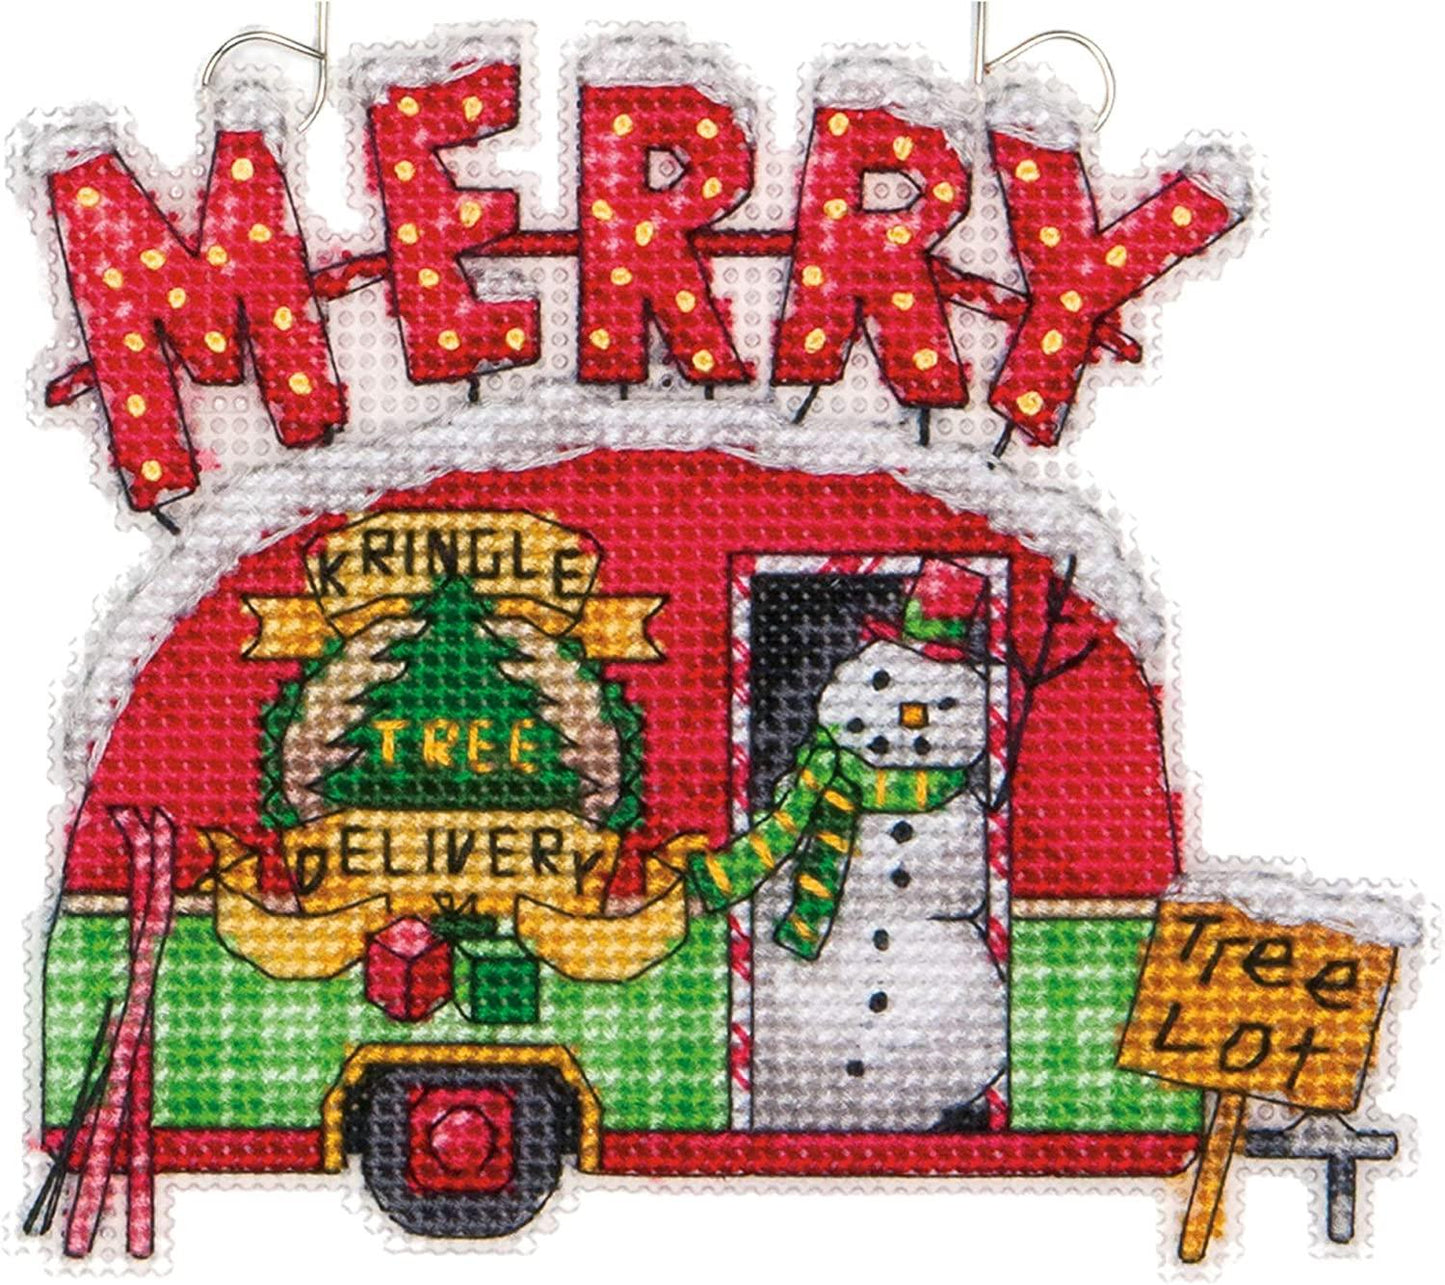 HOLIDAY TRUCK ORNAMENTS, Counted Cross Stitch Kit, 14 count clear plastic canvas, DIMENSIONS (70-08974)